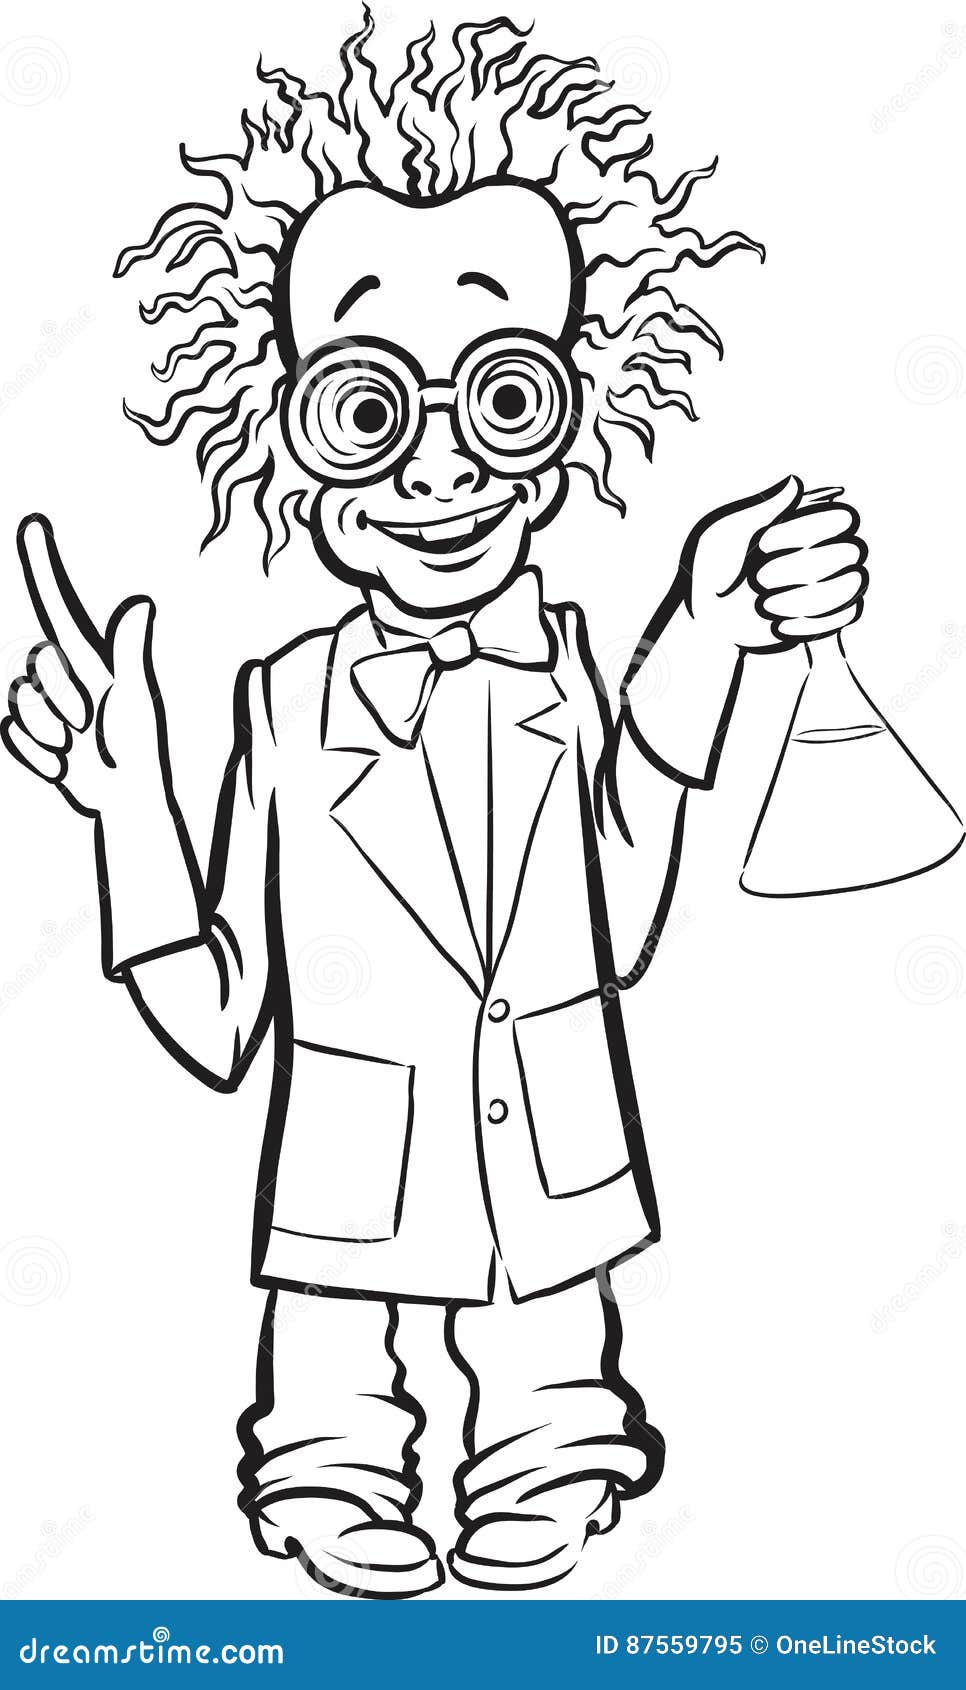 Whiteboard Drawing - Cartoon Standing Mad Scientist Stock Vector -  Illustration of avatar, experiment: 87559795